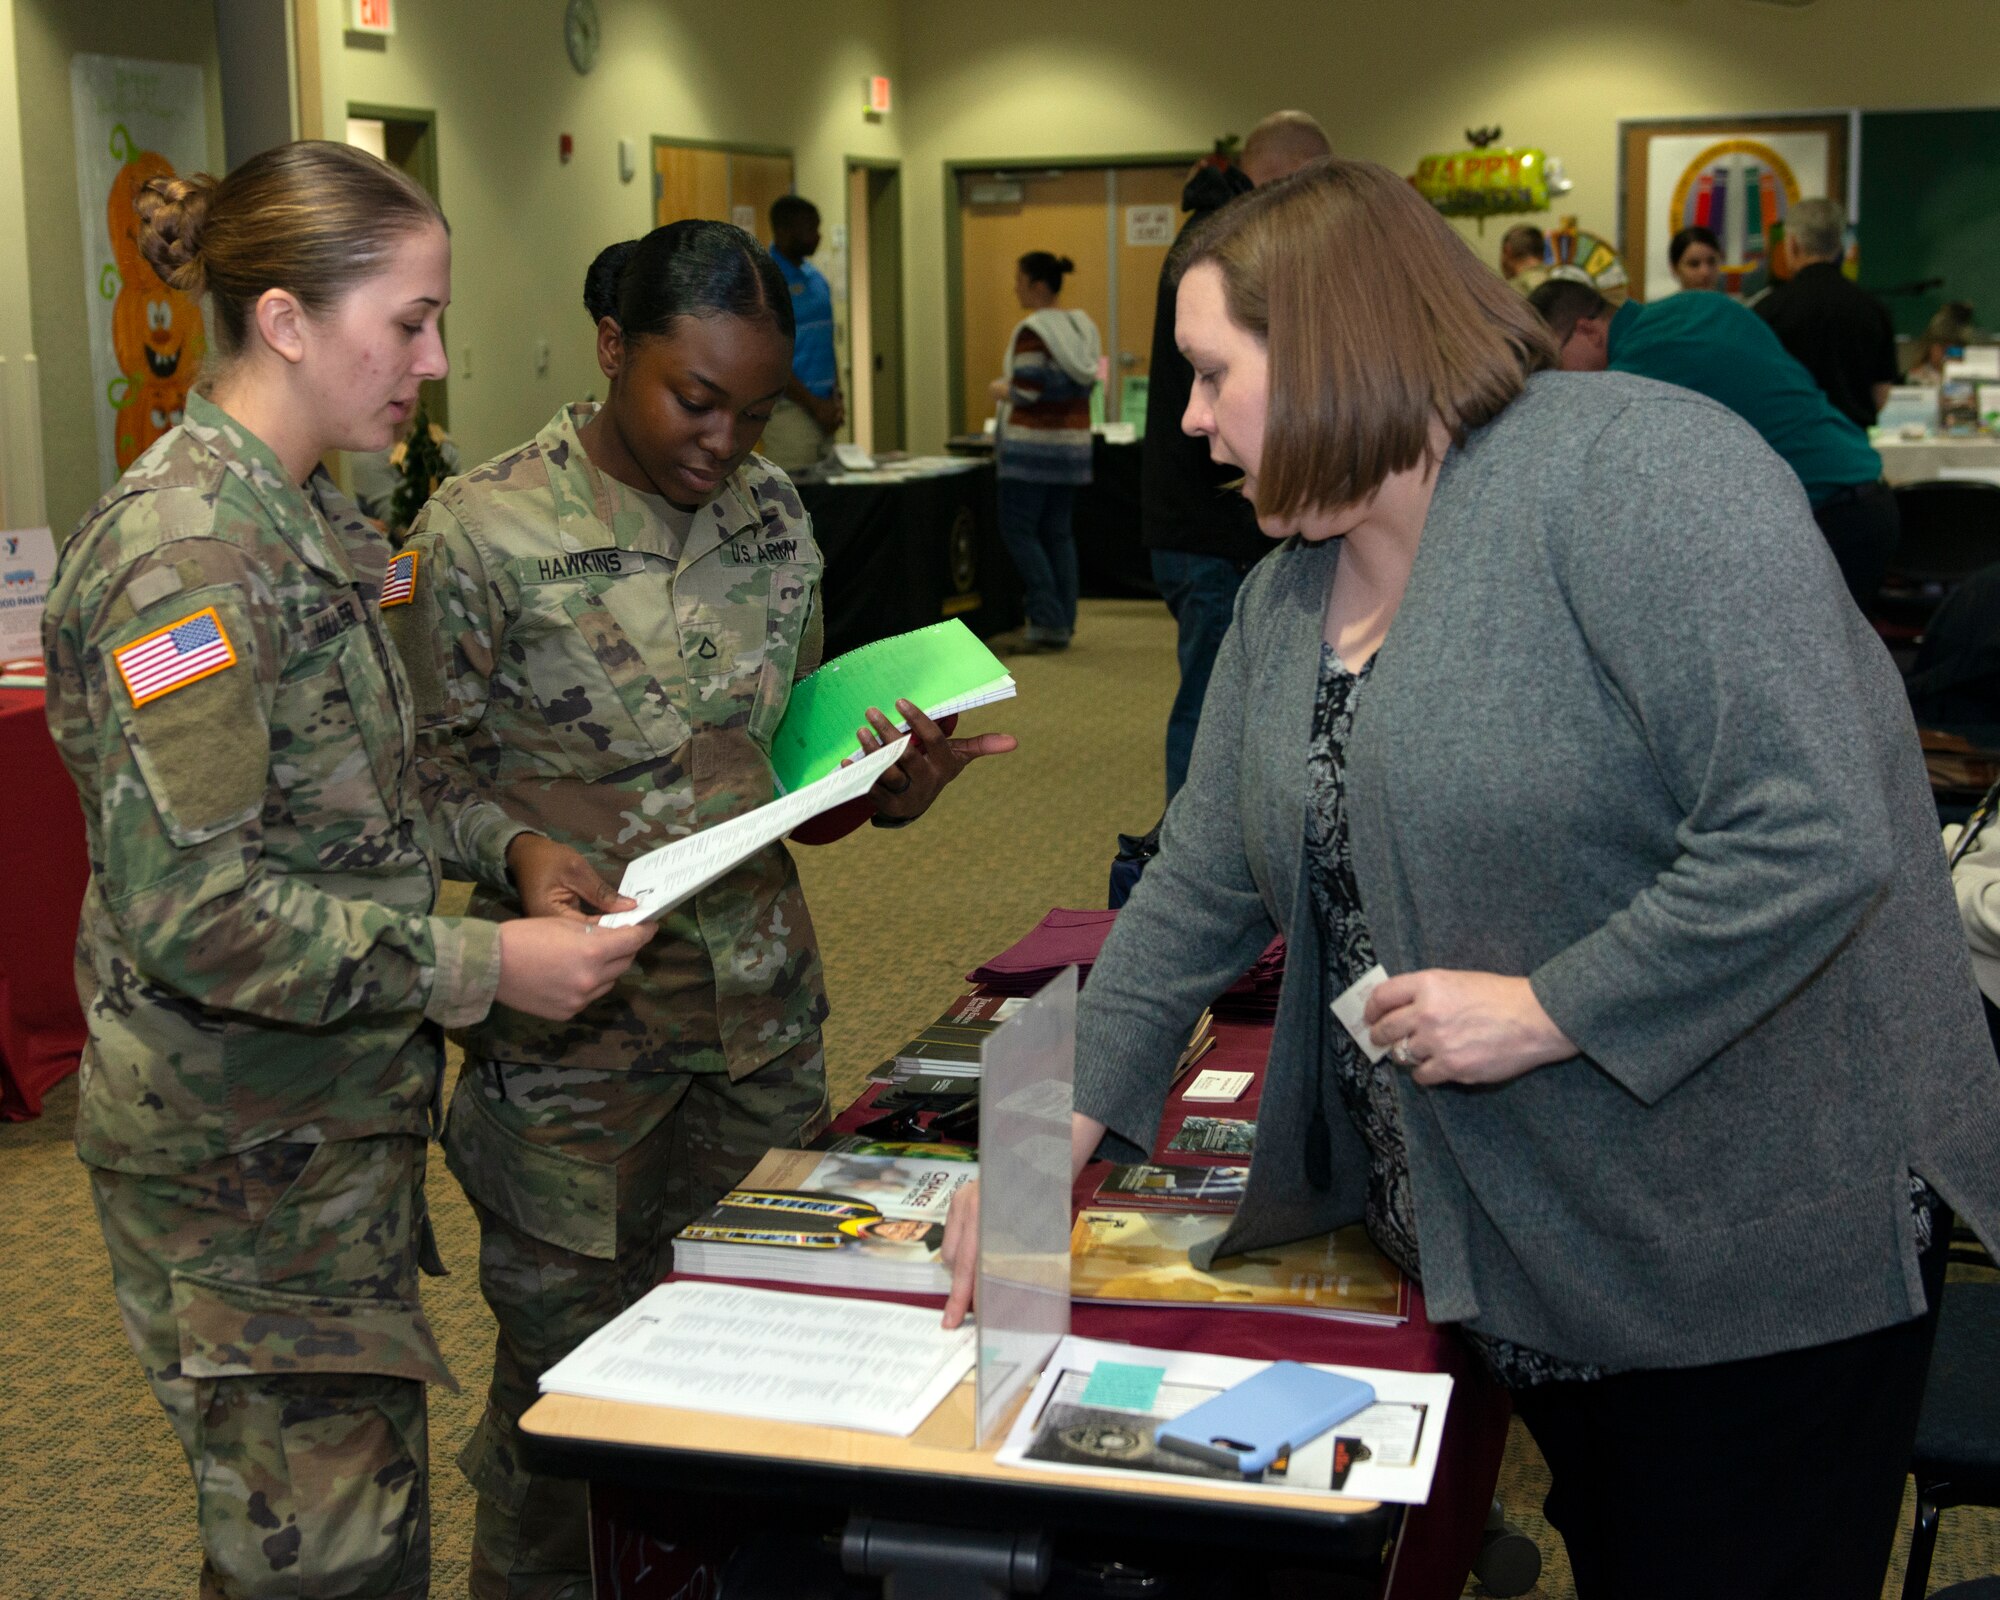 U.S. Army privates first class Whitney Hullander and Armiyah Hawkins, both parachute riggers with the 725th Brigade Support Battalion, 4th Infantry Brigade Combat Team (Airborne), 25th Infantry Division, U.S. Army Alaska, learn about college courses during the Fall Education Fair at Joint Base Elmendorf-Richardson, Alaska, Oct. 31, 2019. The JBER Army Education Center hosted the event, which allowed more than 20 vendors to showcase a variety of educational opportunities.